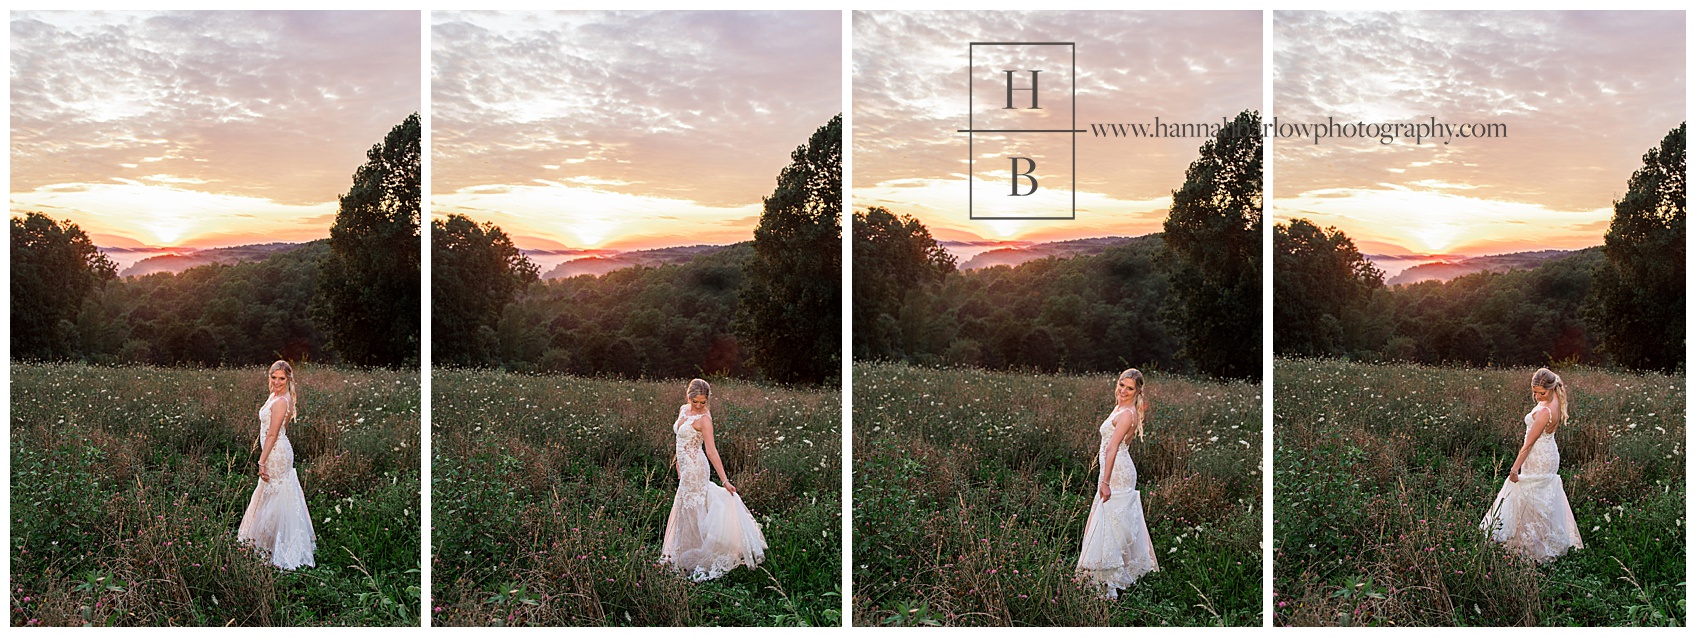 Bride Sunset Photos at The Barn on Enchanted Acres